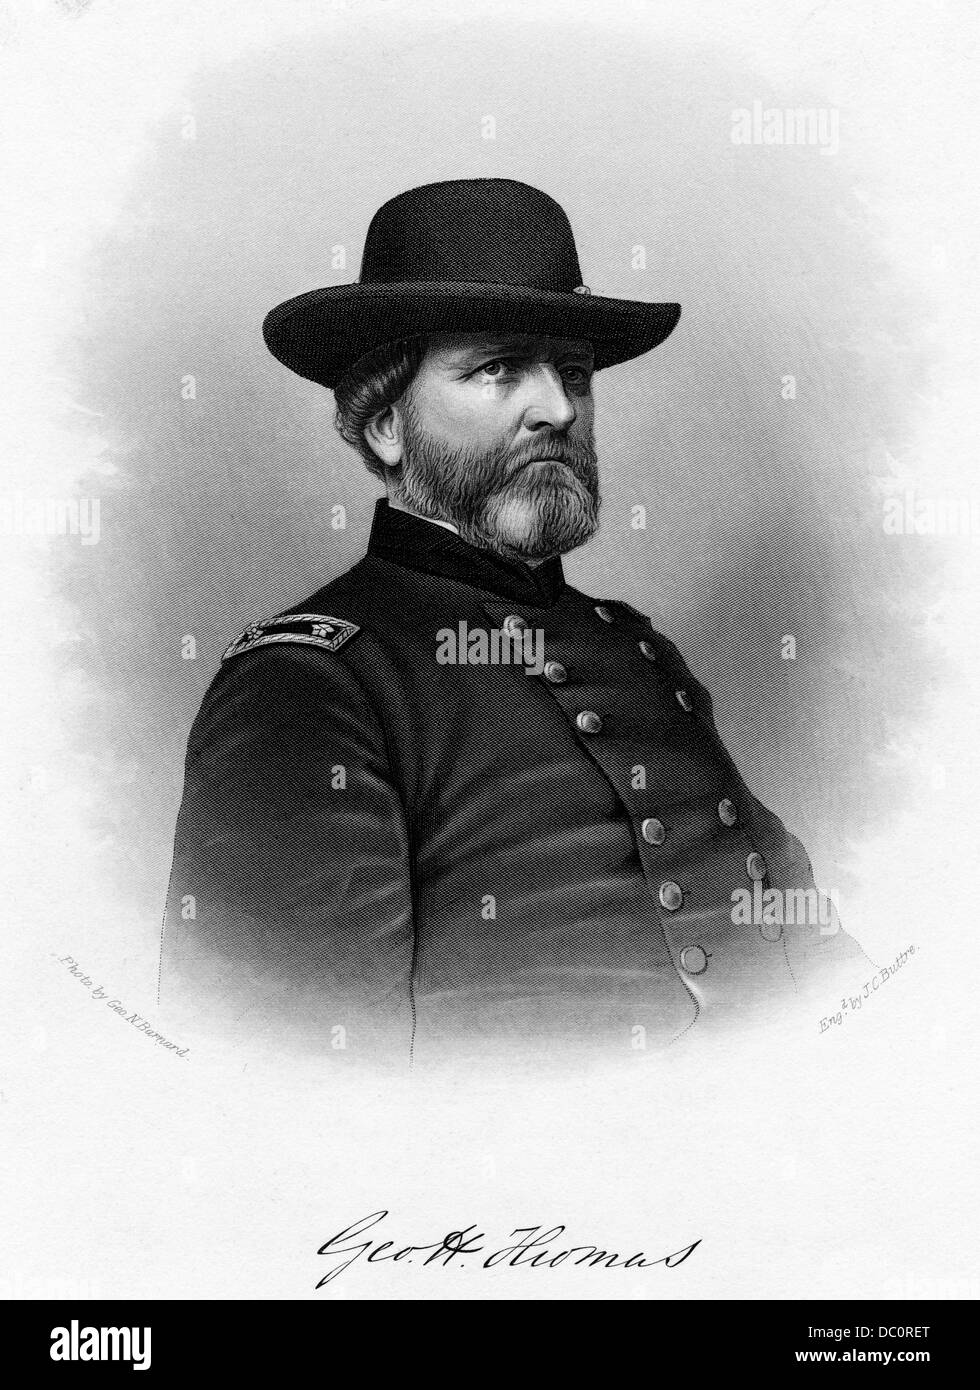 1800s 1860s PORTRAIT OF MAJOR GENERAL GEORGE H THOMAS UNION ARMY PRINCIPAL COMMANDER IN WESTERN THEATER OF AMERICAN CIVIL WAR Stock Photo